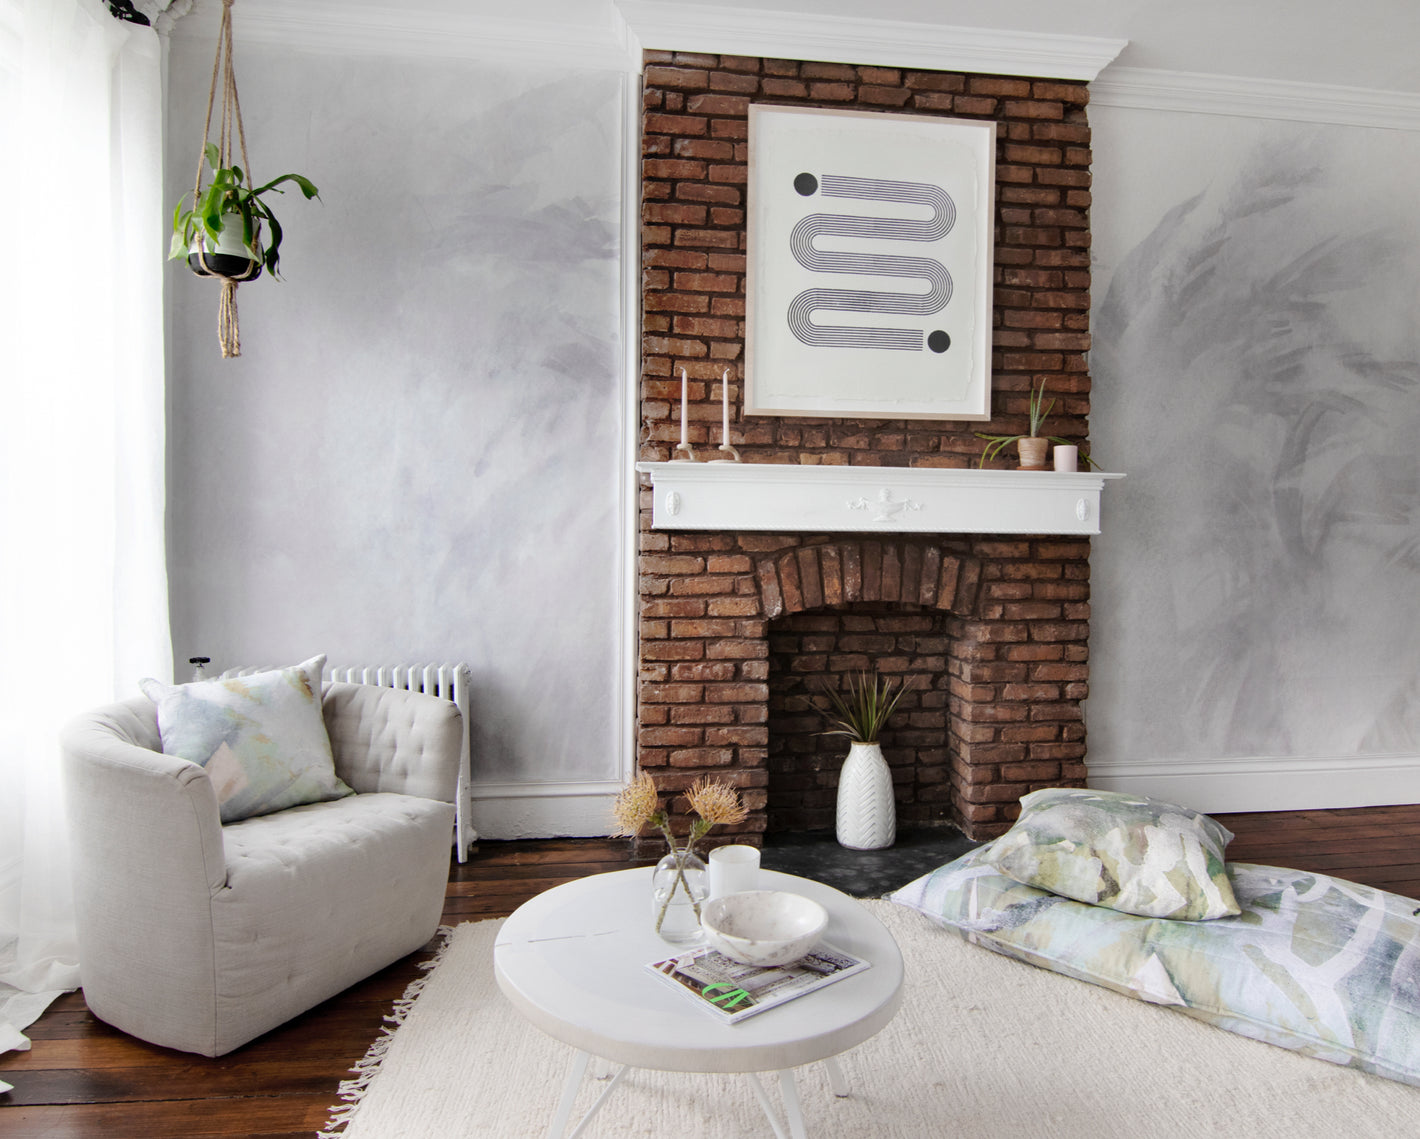 A living room with a brick fireplace and white furniture